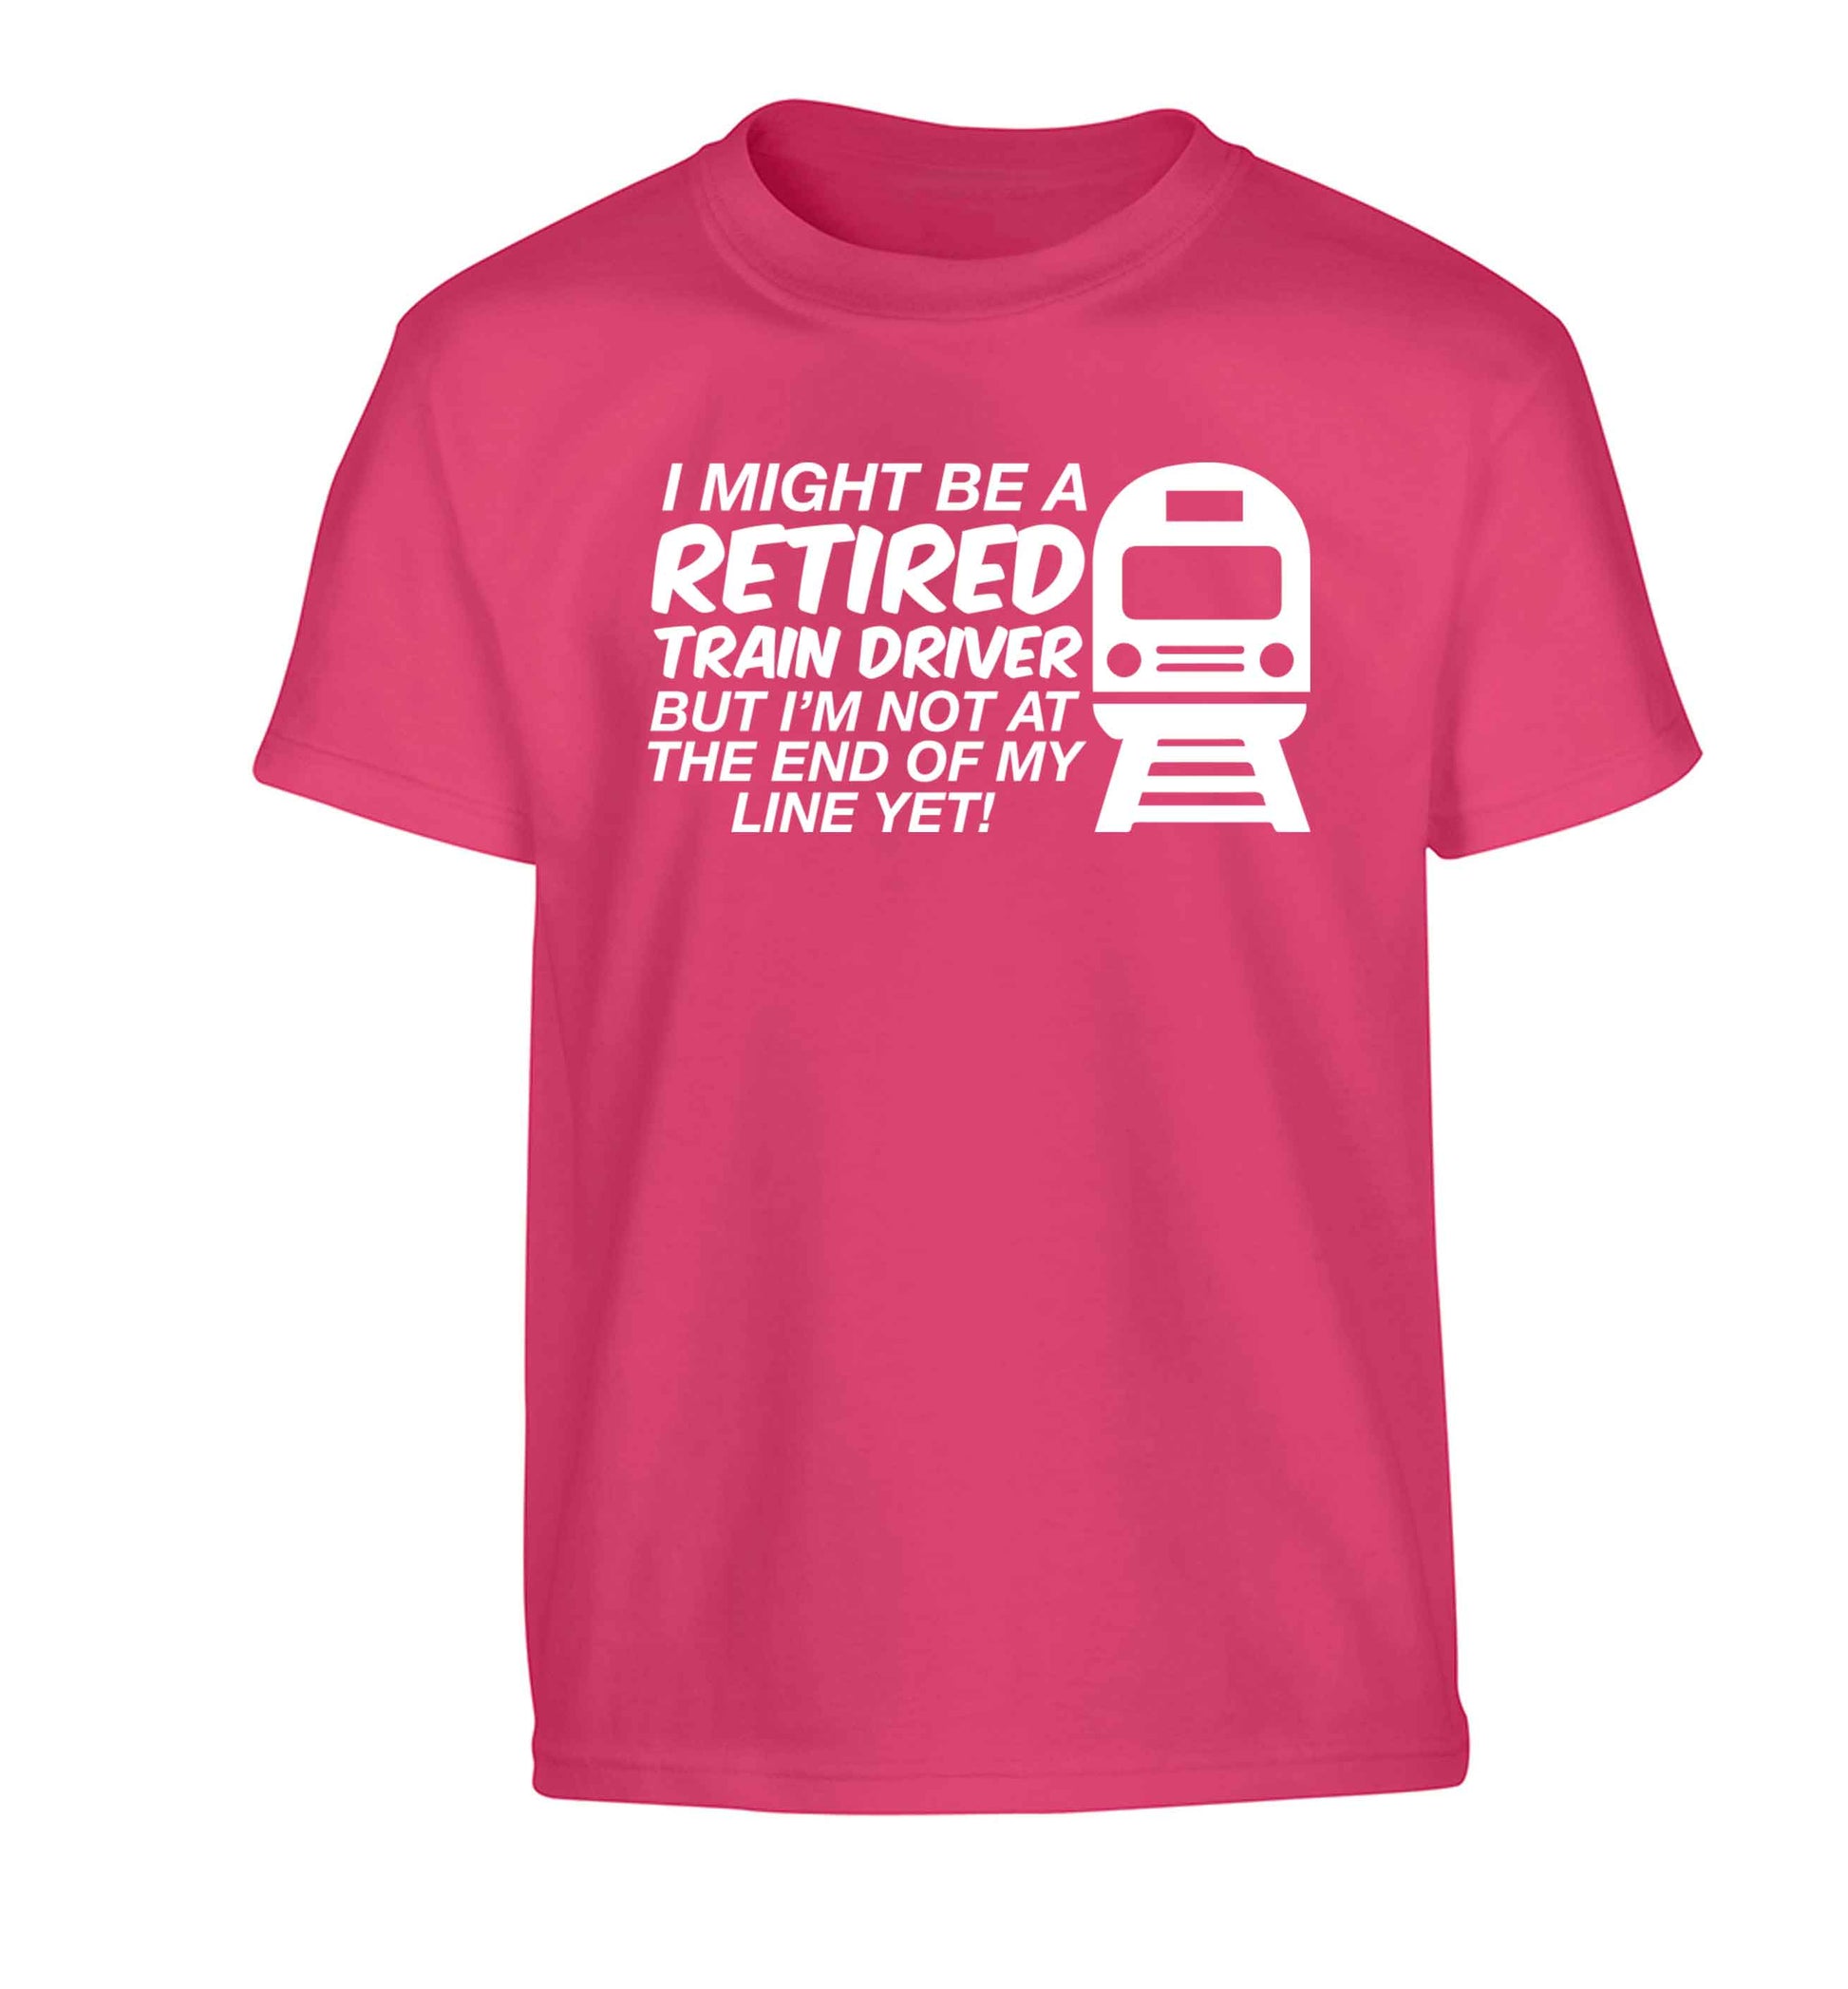 Retired train driver but I'm not at the end of my line yet Children's pink Tshirt 12-13 Years